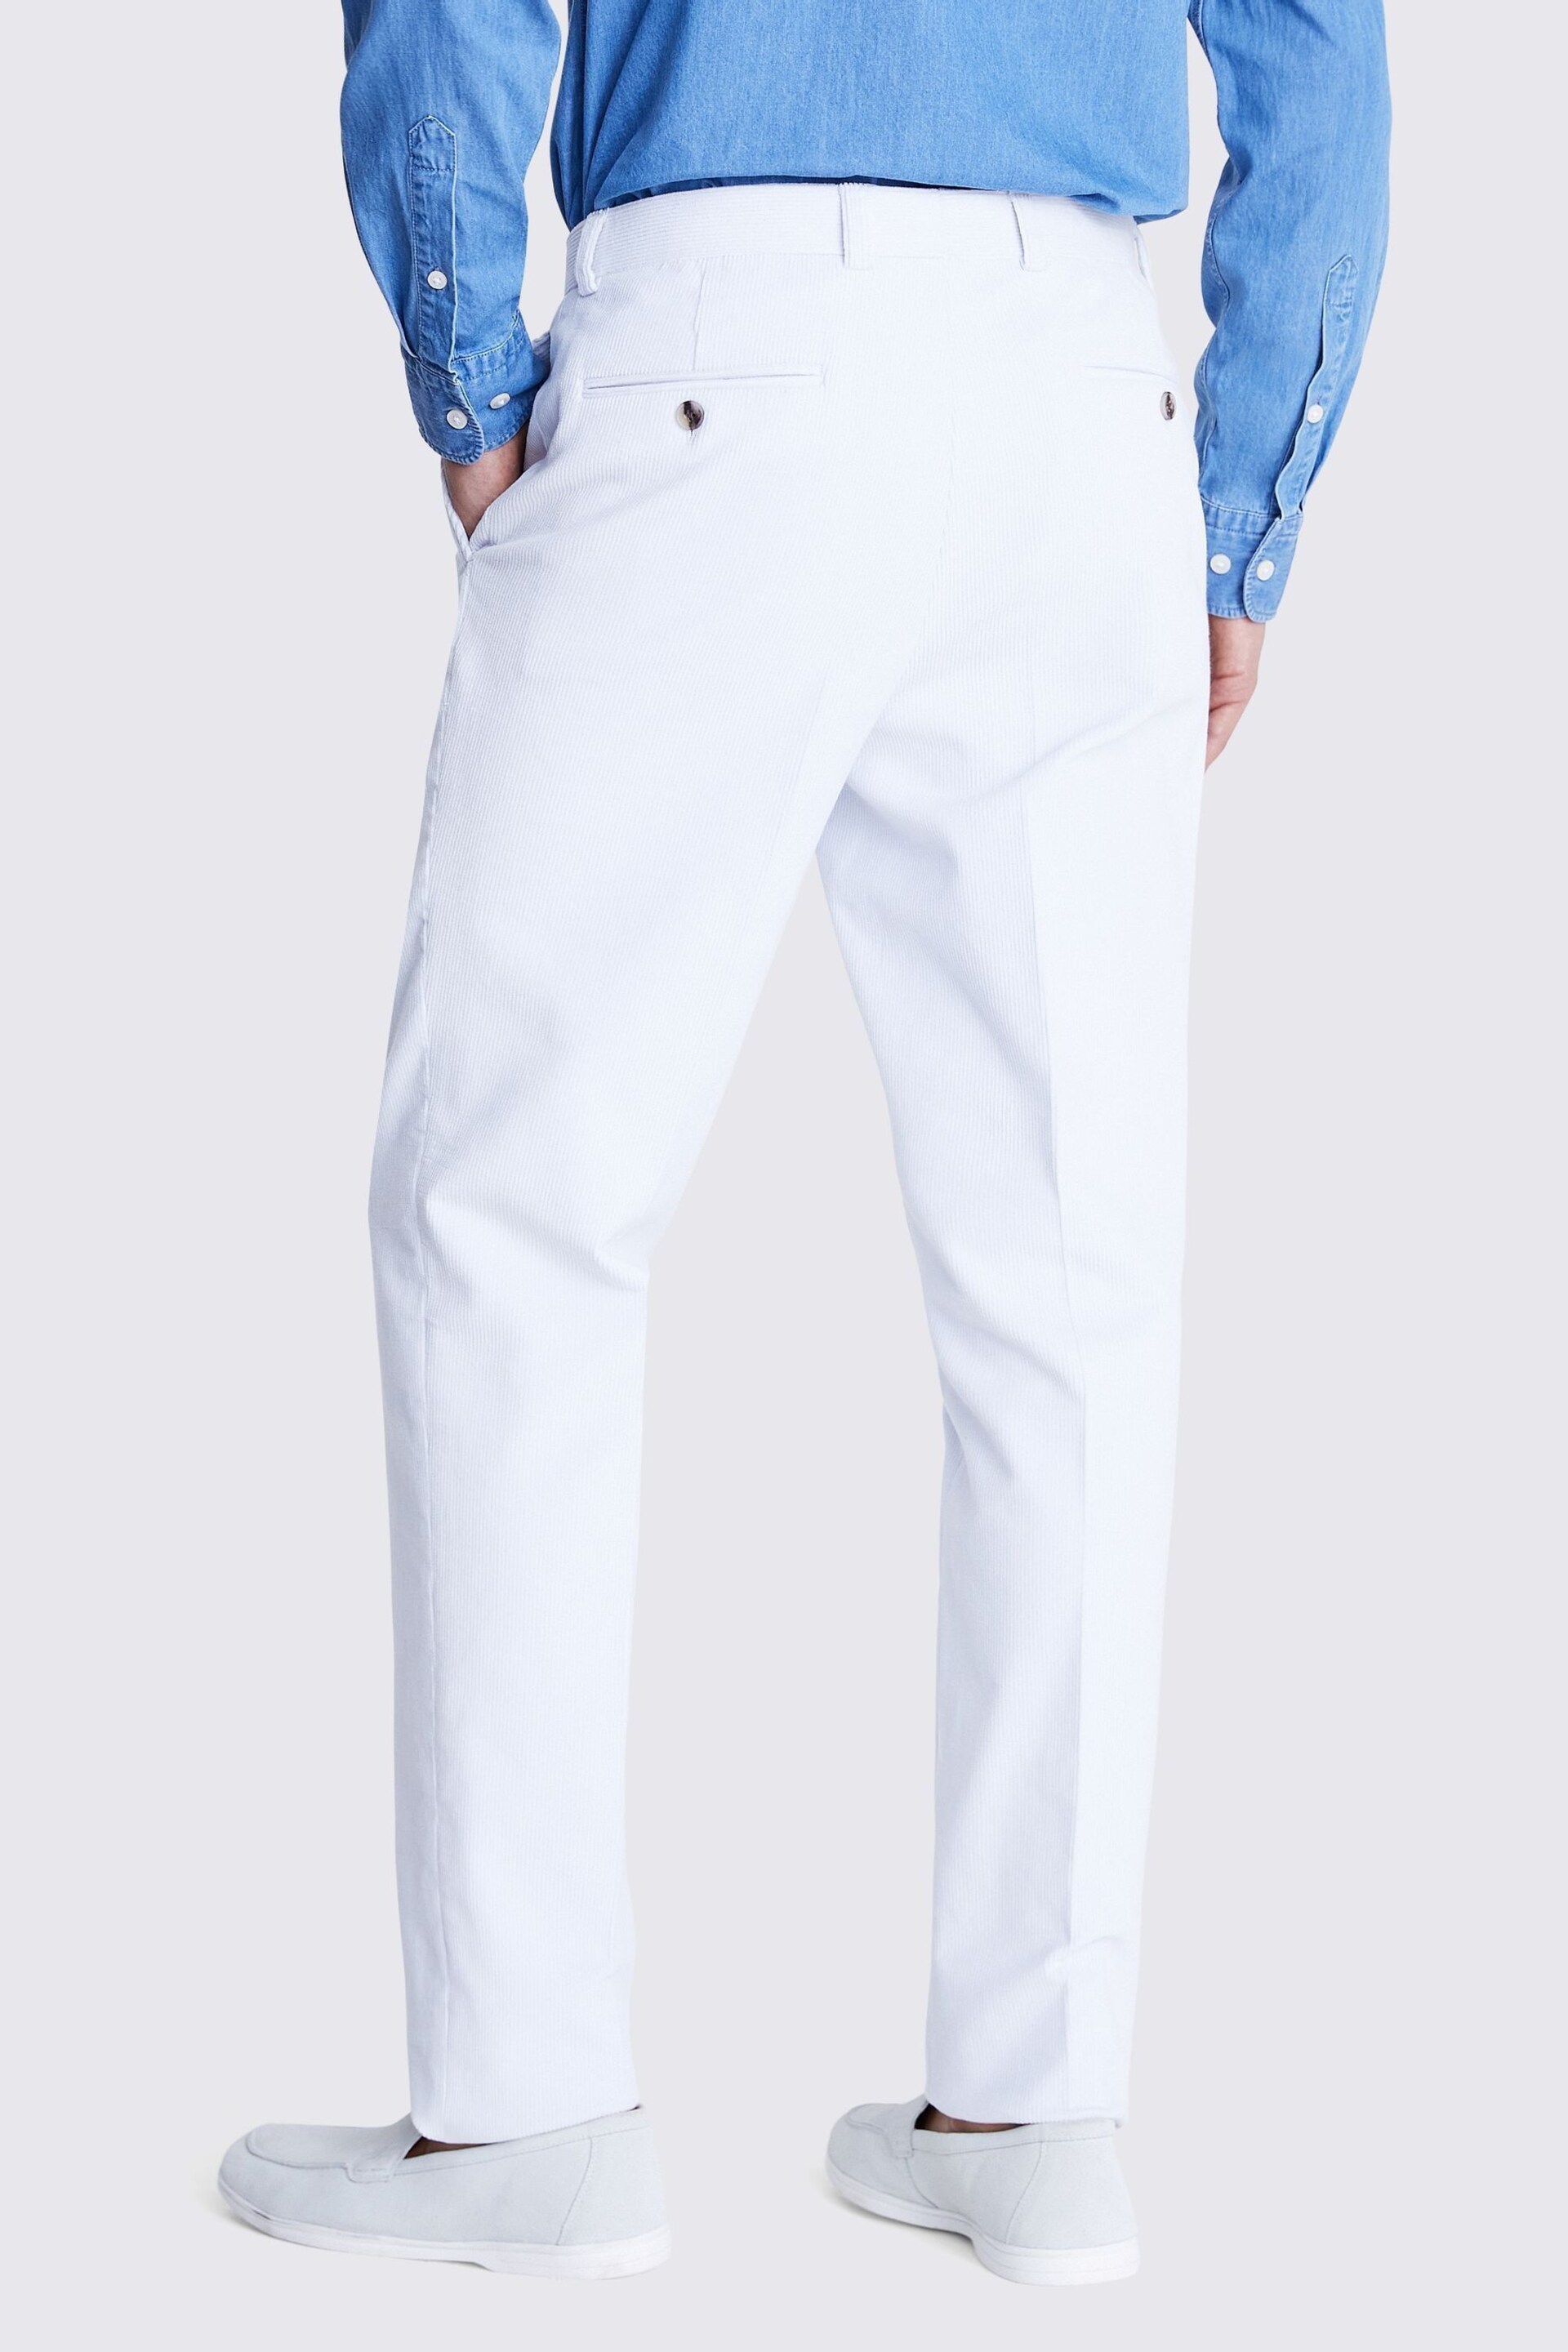 MOSS Light Blue Tailored Fit Corduroy Trousers - Image 2 of 3